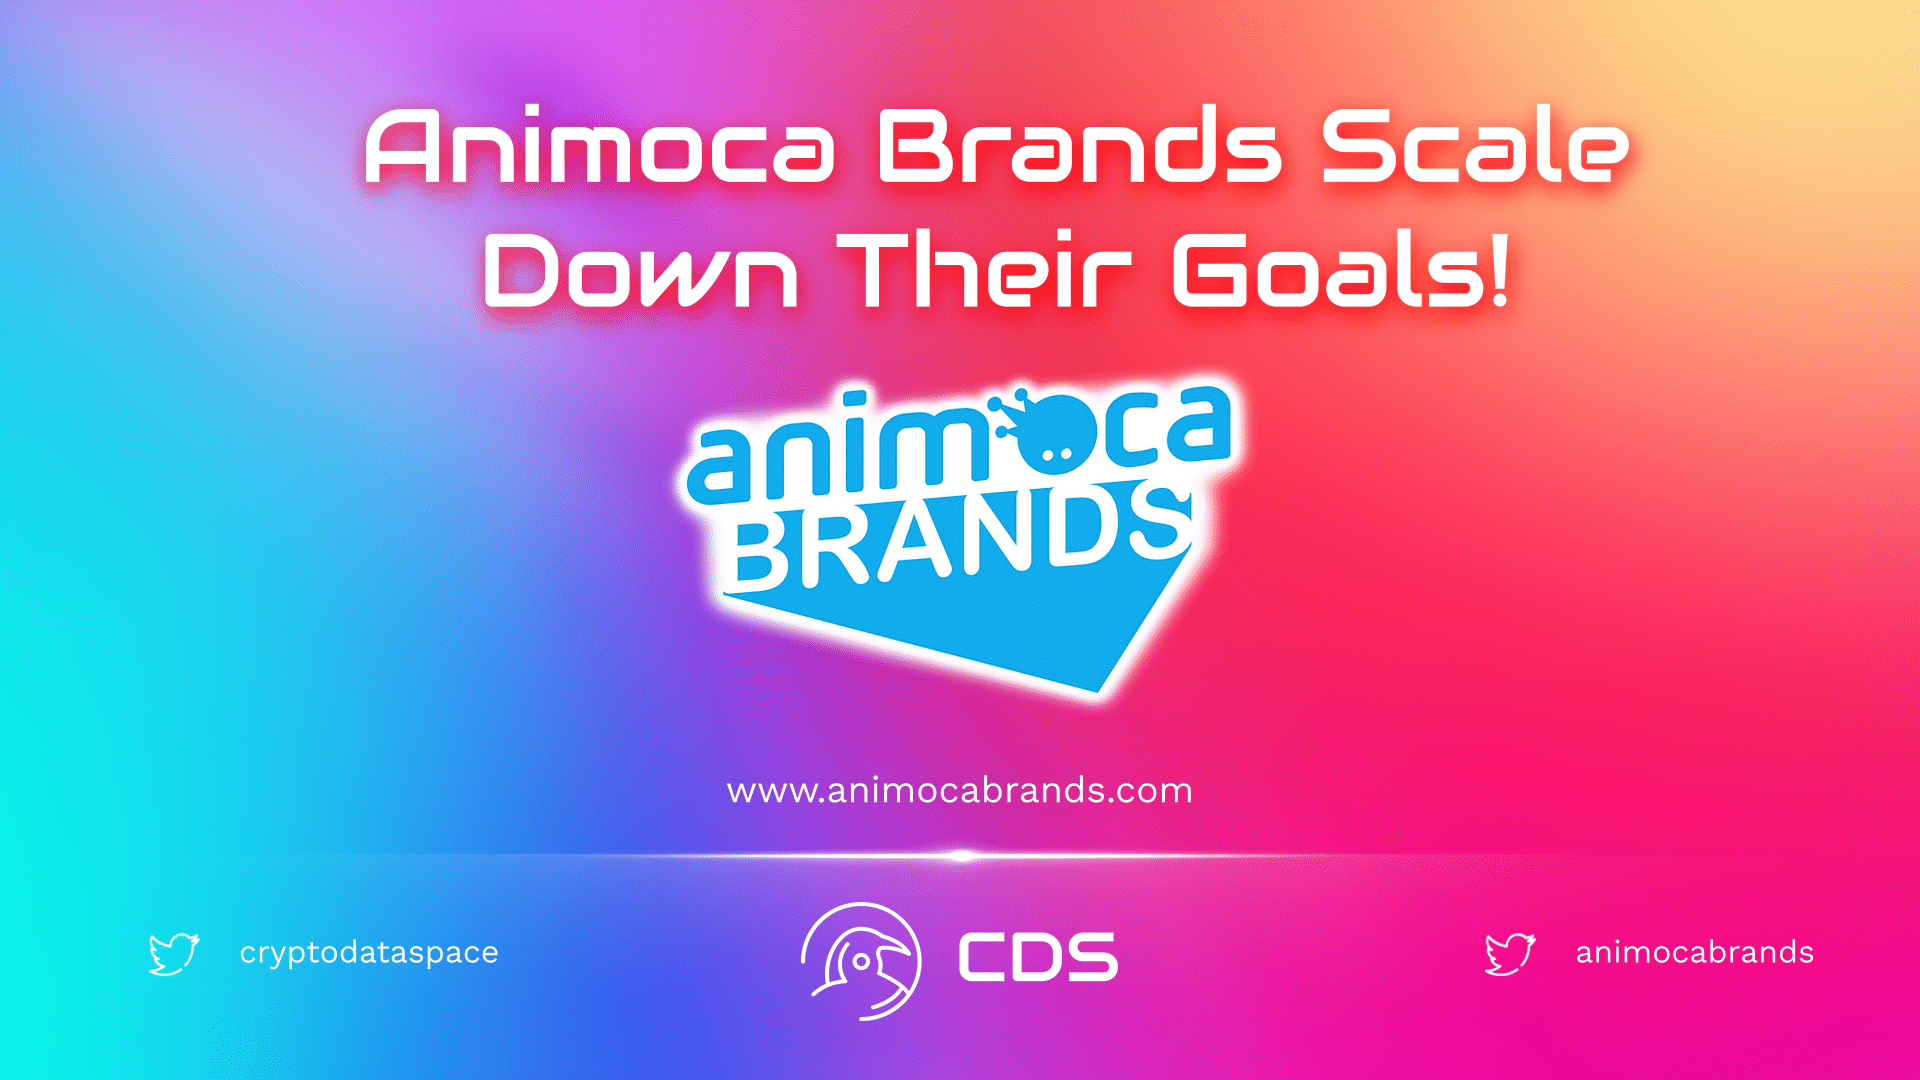 Animoca Brands Scale Down Their Goals!